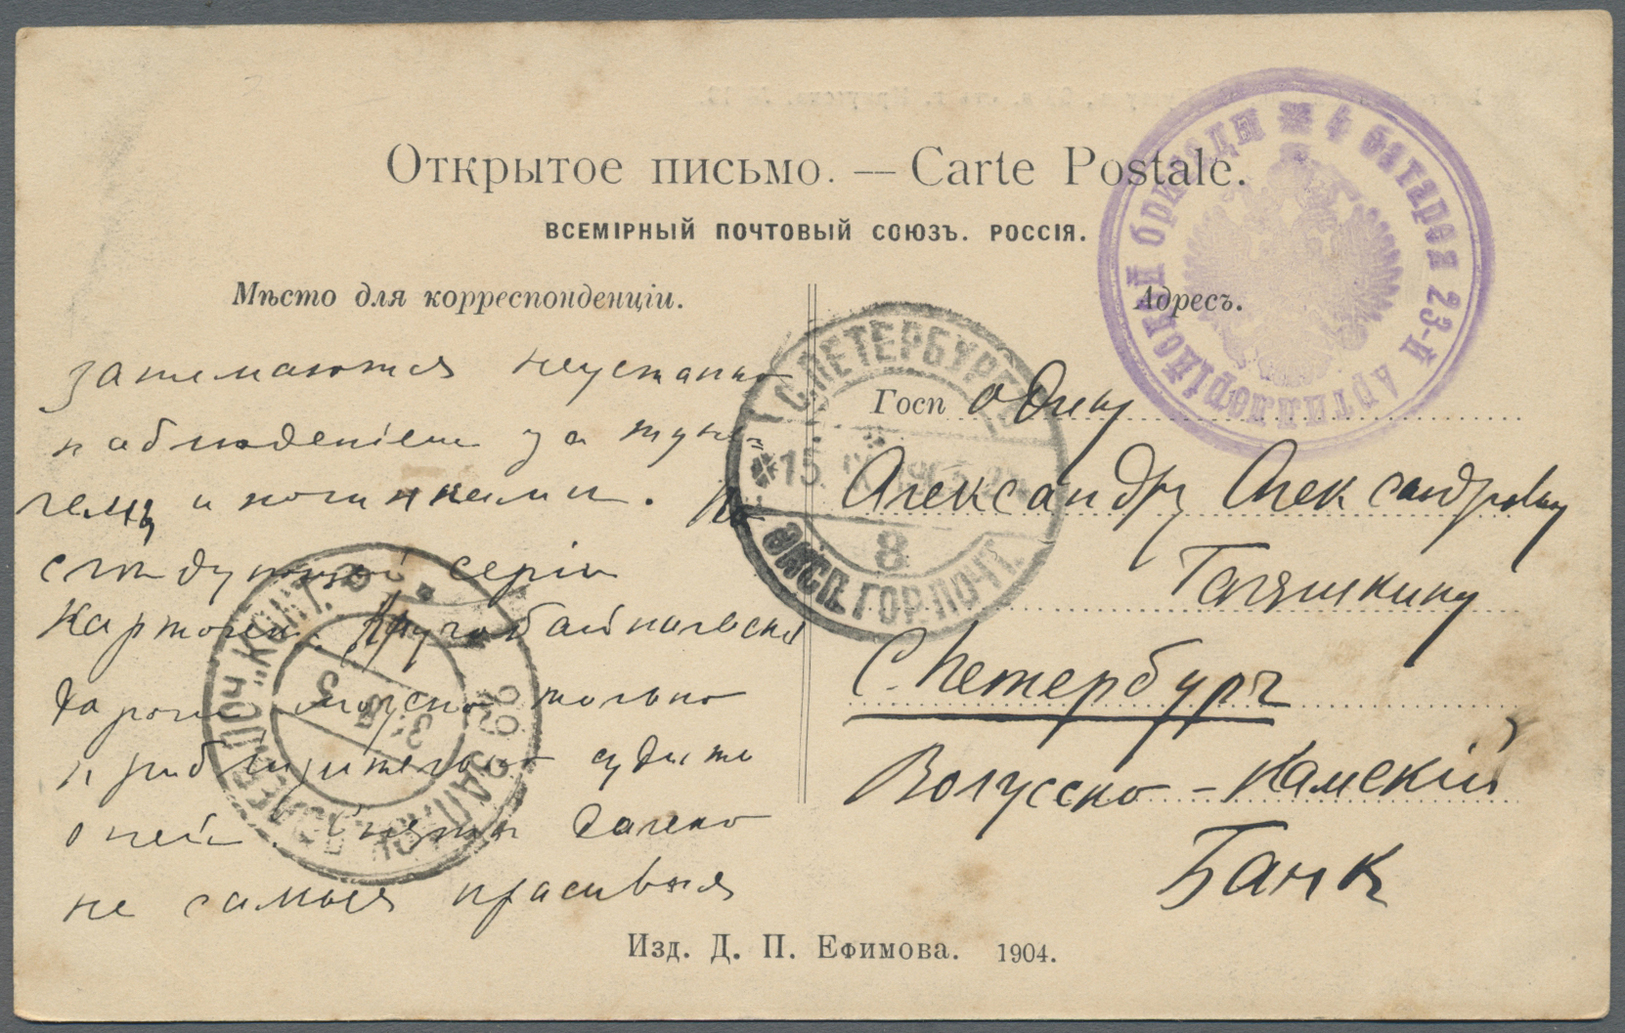 Russland - Militärpost / Feldpost: 1904/05, Russo-Japanese war, ppc used as field post cards (6) inc. "No. 29